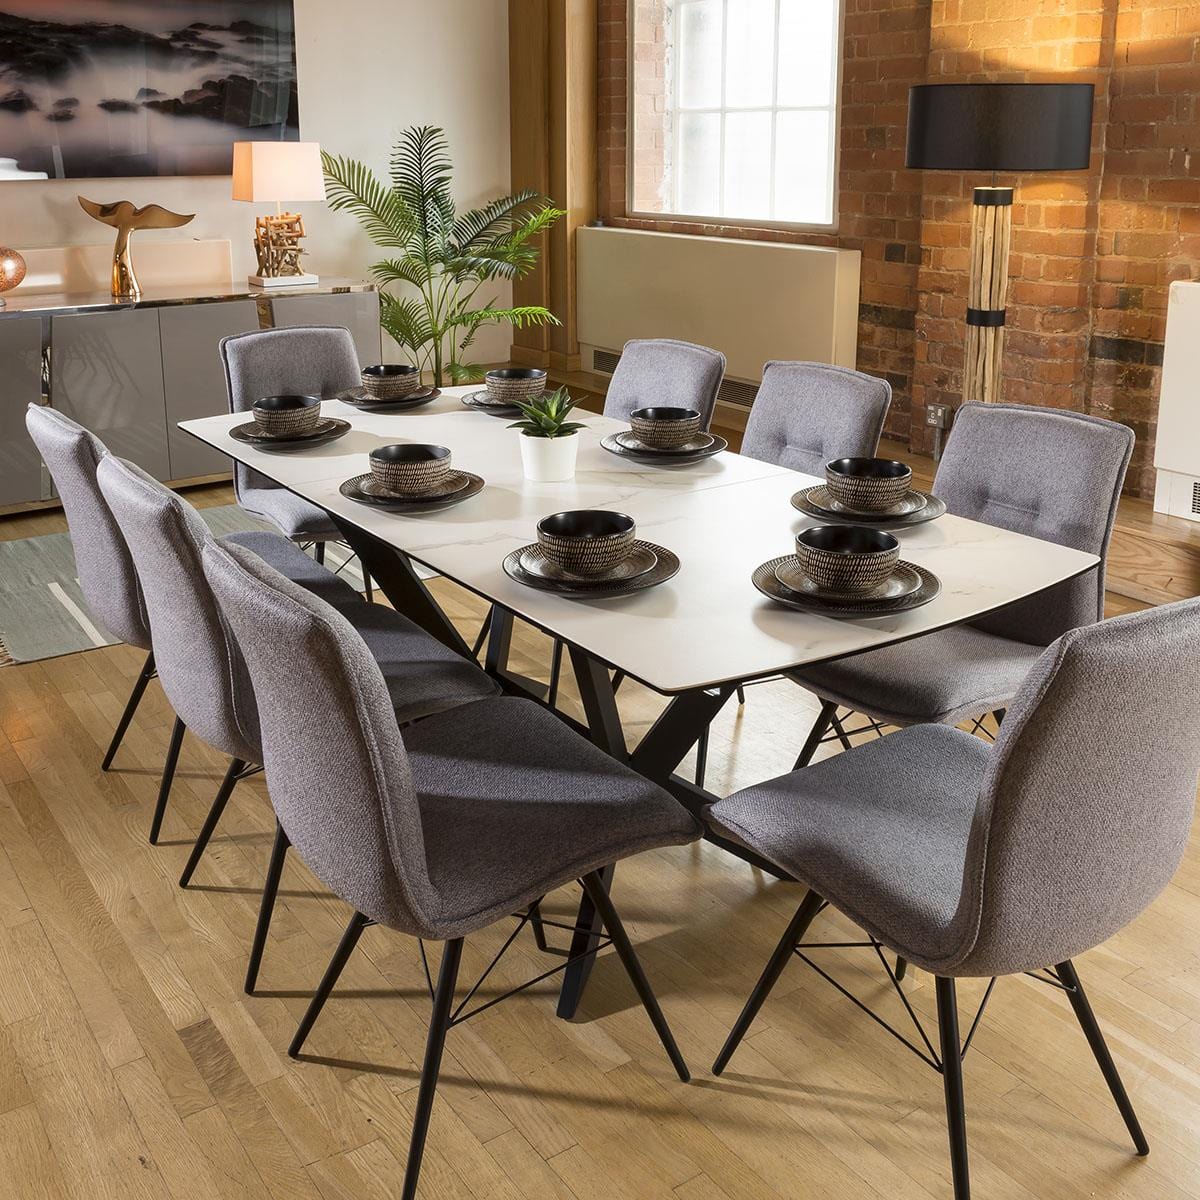 Quatropi Marble White Ceramic Dining Table + 8 Grey Fabric Chairs 9137